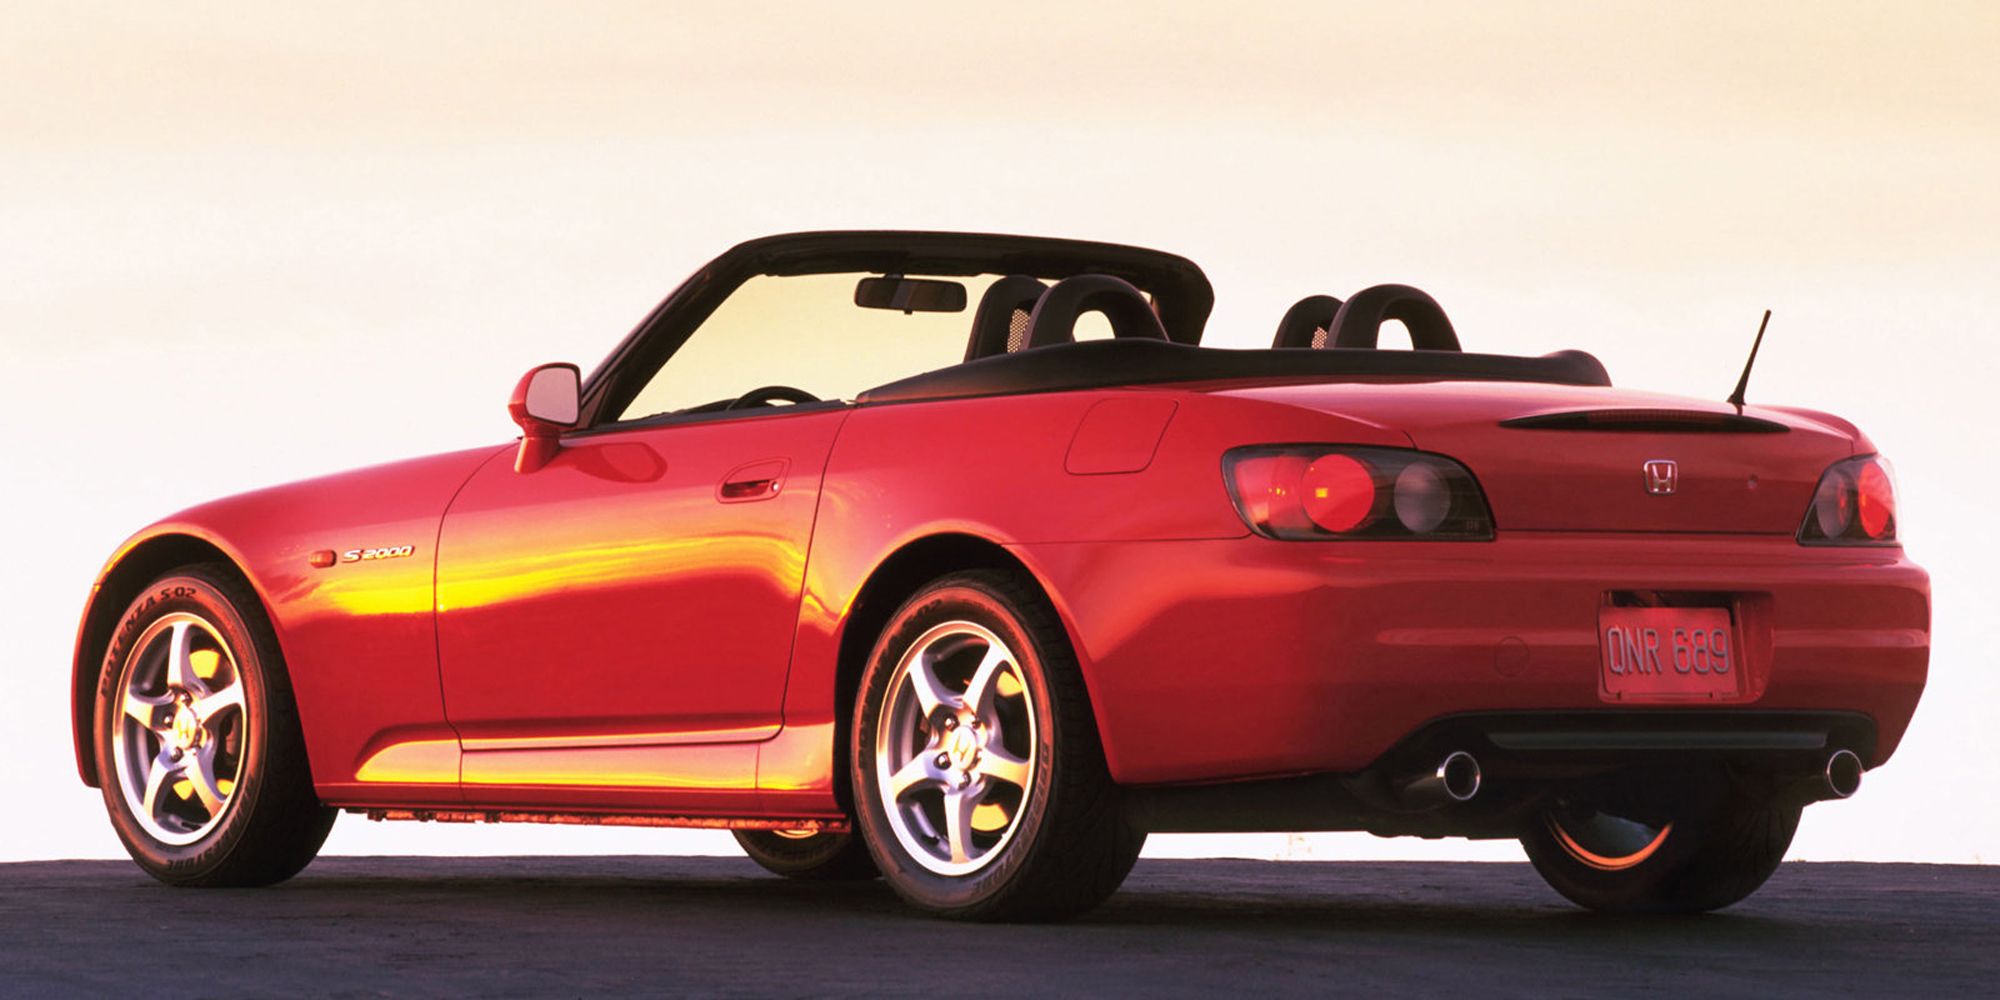 Rear 3/4 view of a red S2000 AP1